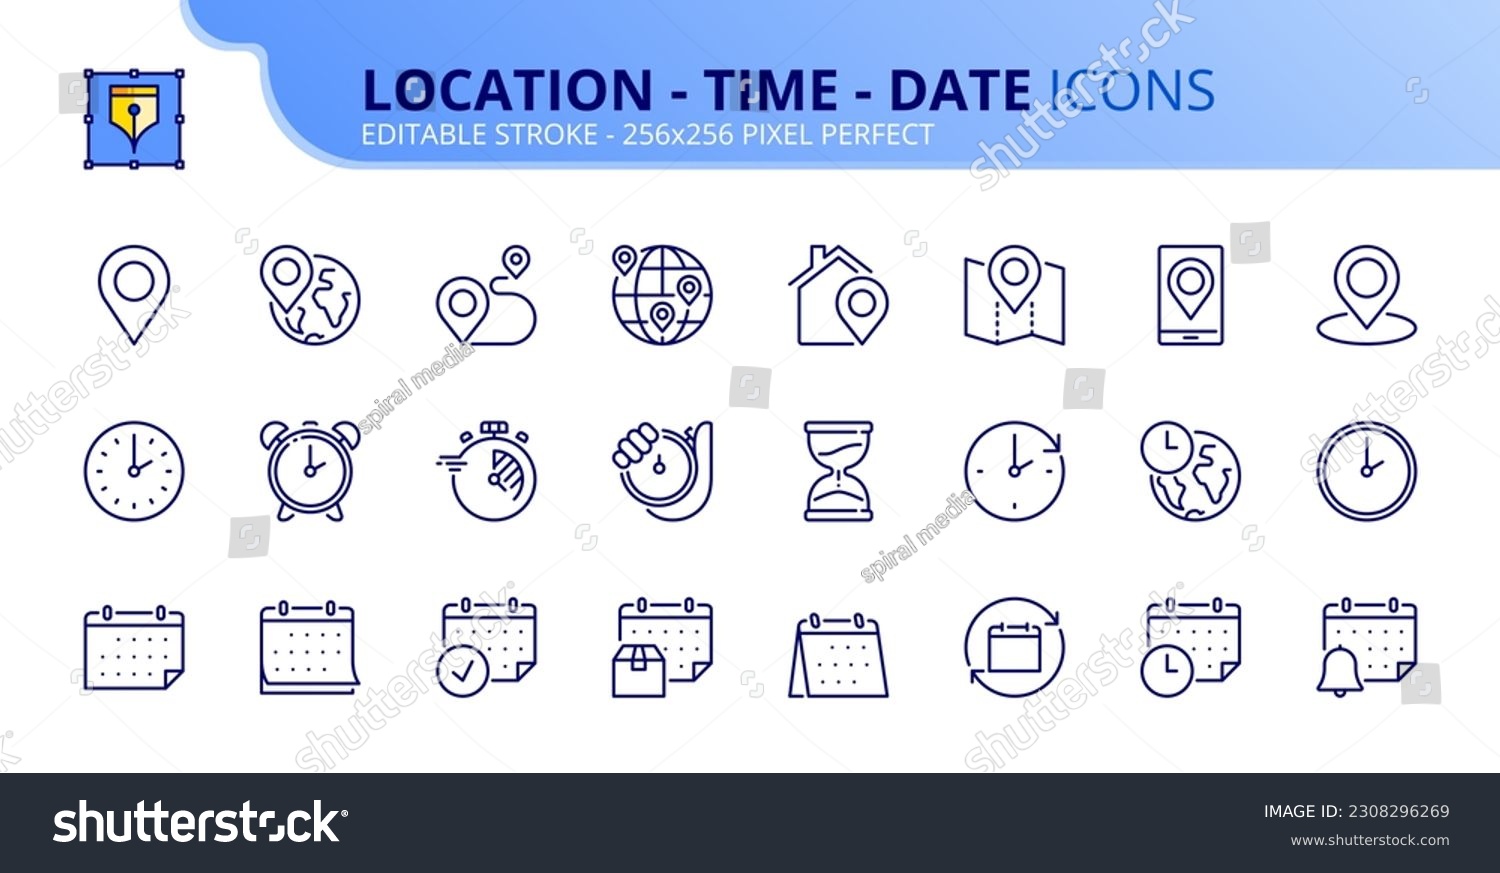 Line icons about location, time and date. Contains such icons as clock, schedule, calendar and pin. Editable stroke Vector 256x256 pixel perfect #2308296269